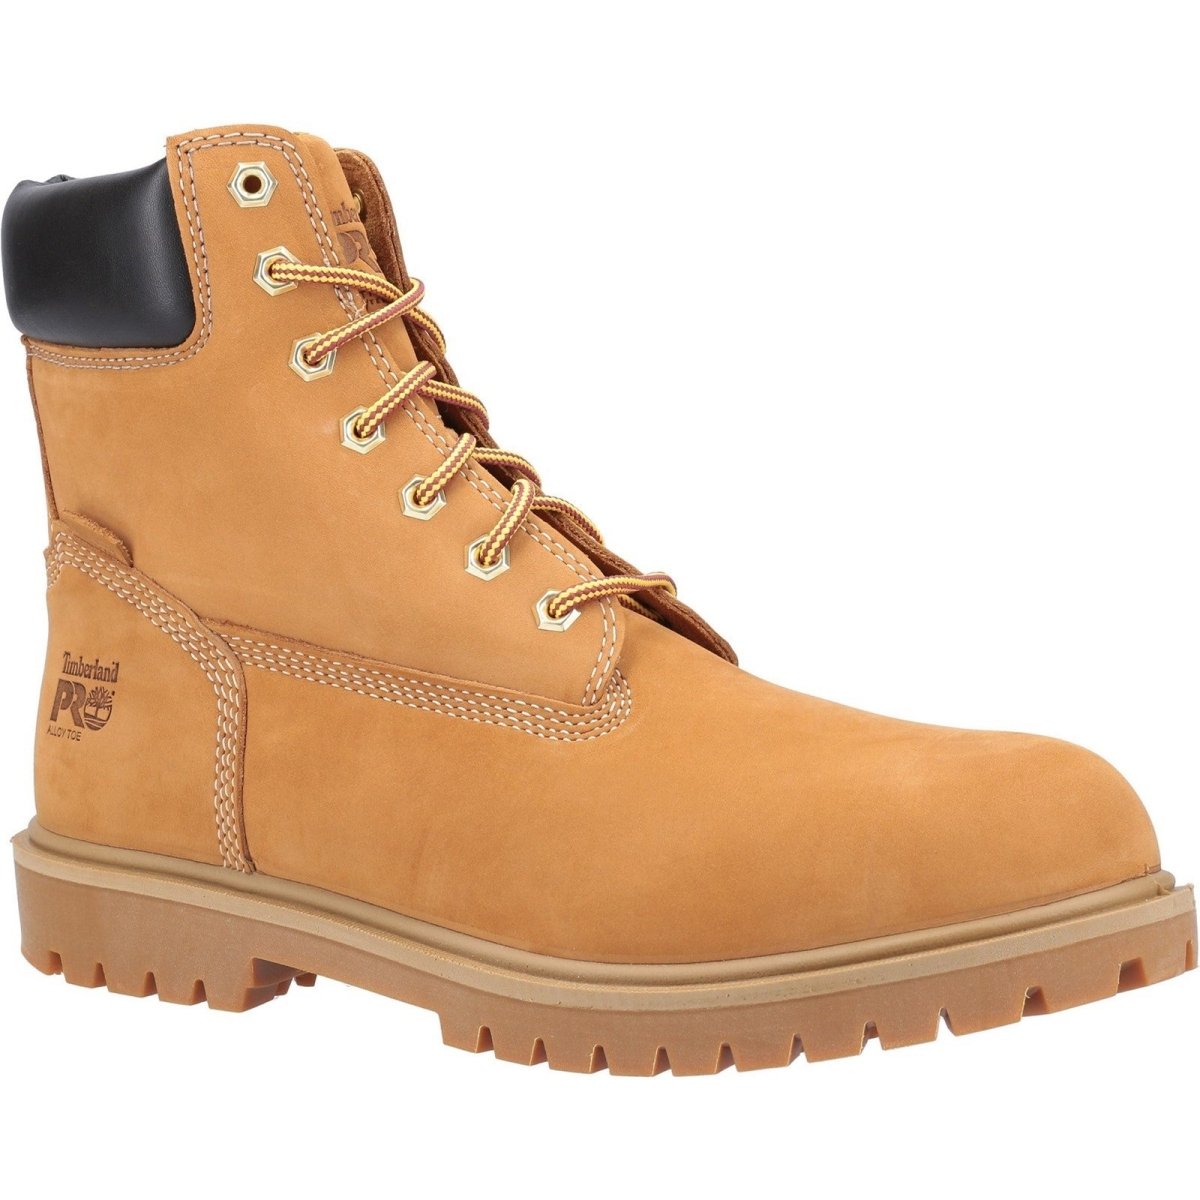 Timberland Pro Iconic Safety Toe Work Boot - Shoe Store Direct